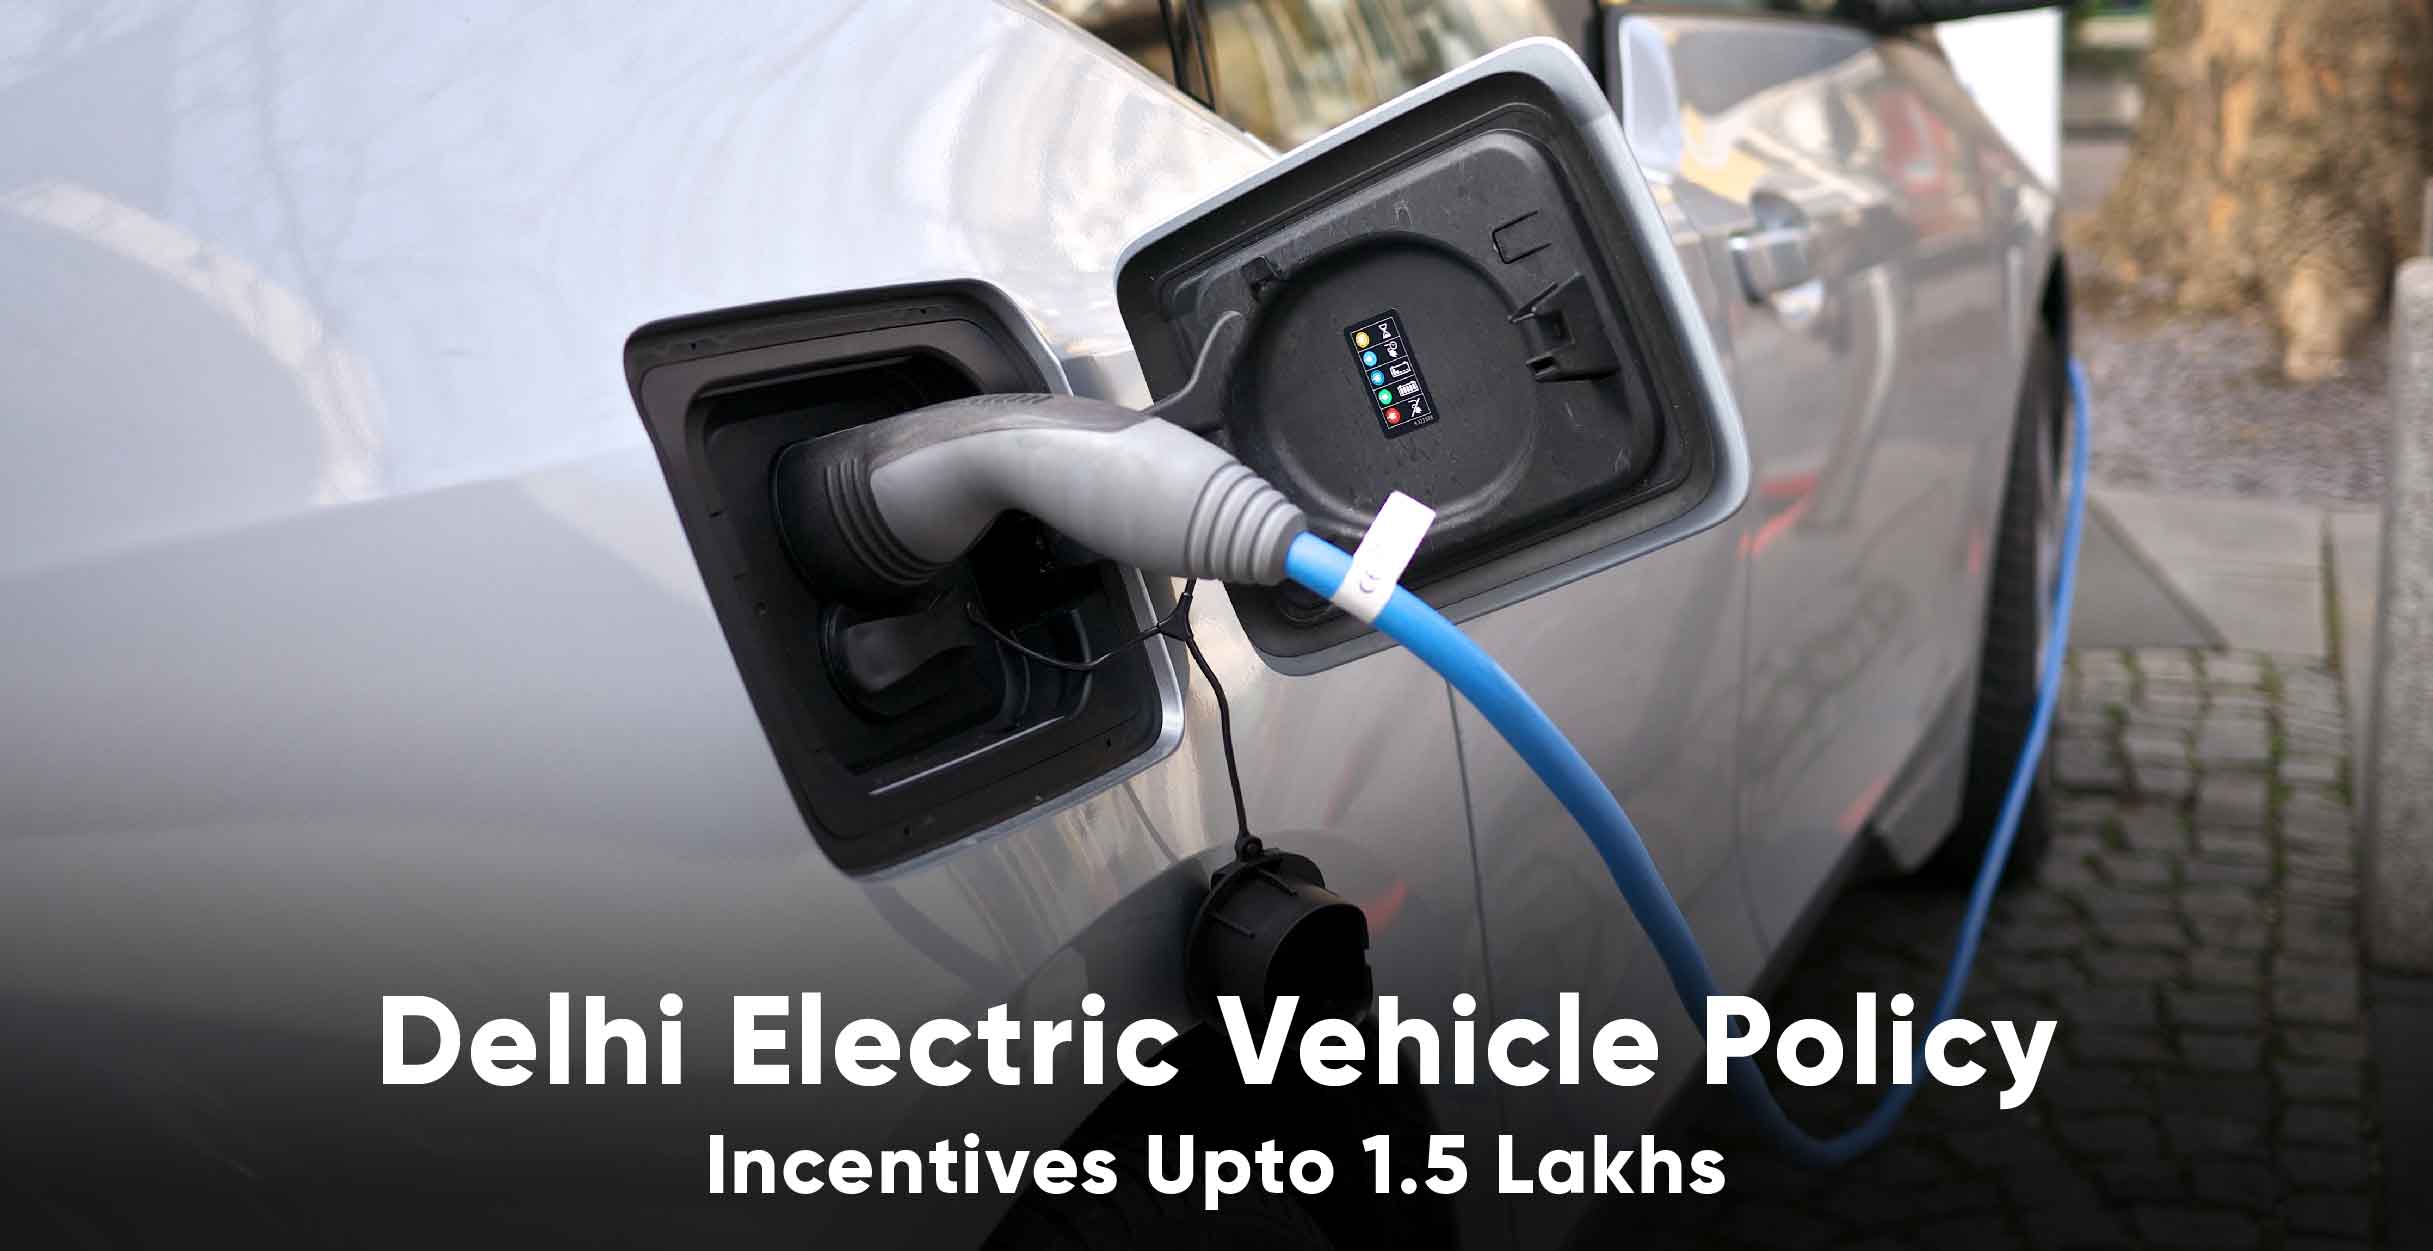 Delhi gets its own Electric Vehicle Policy, Incentives of upto Rs 1.50 lakh